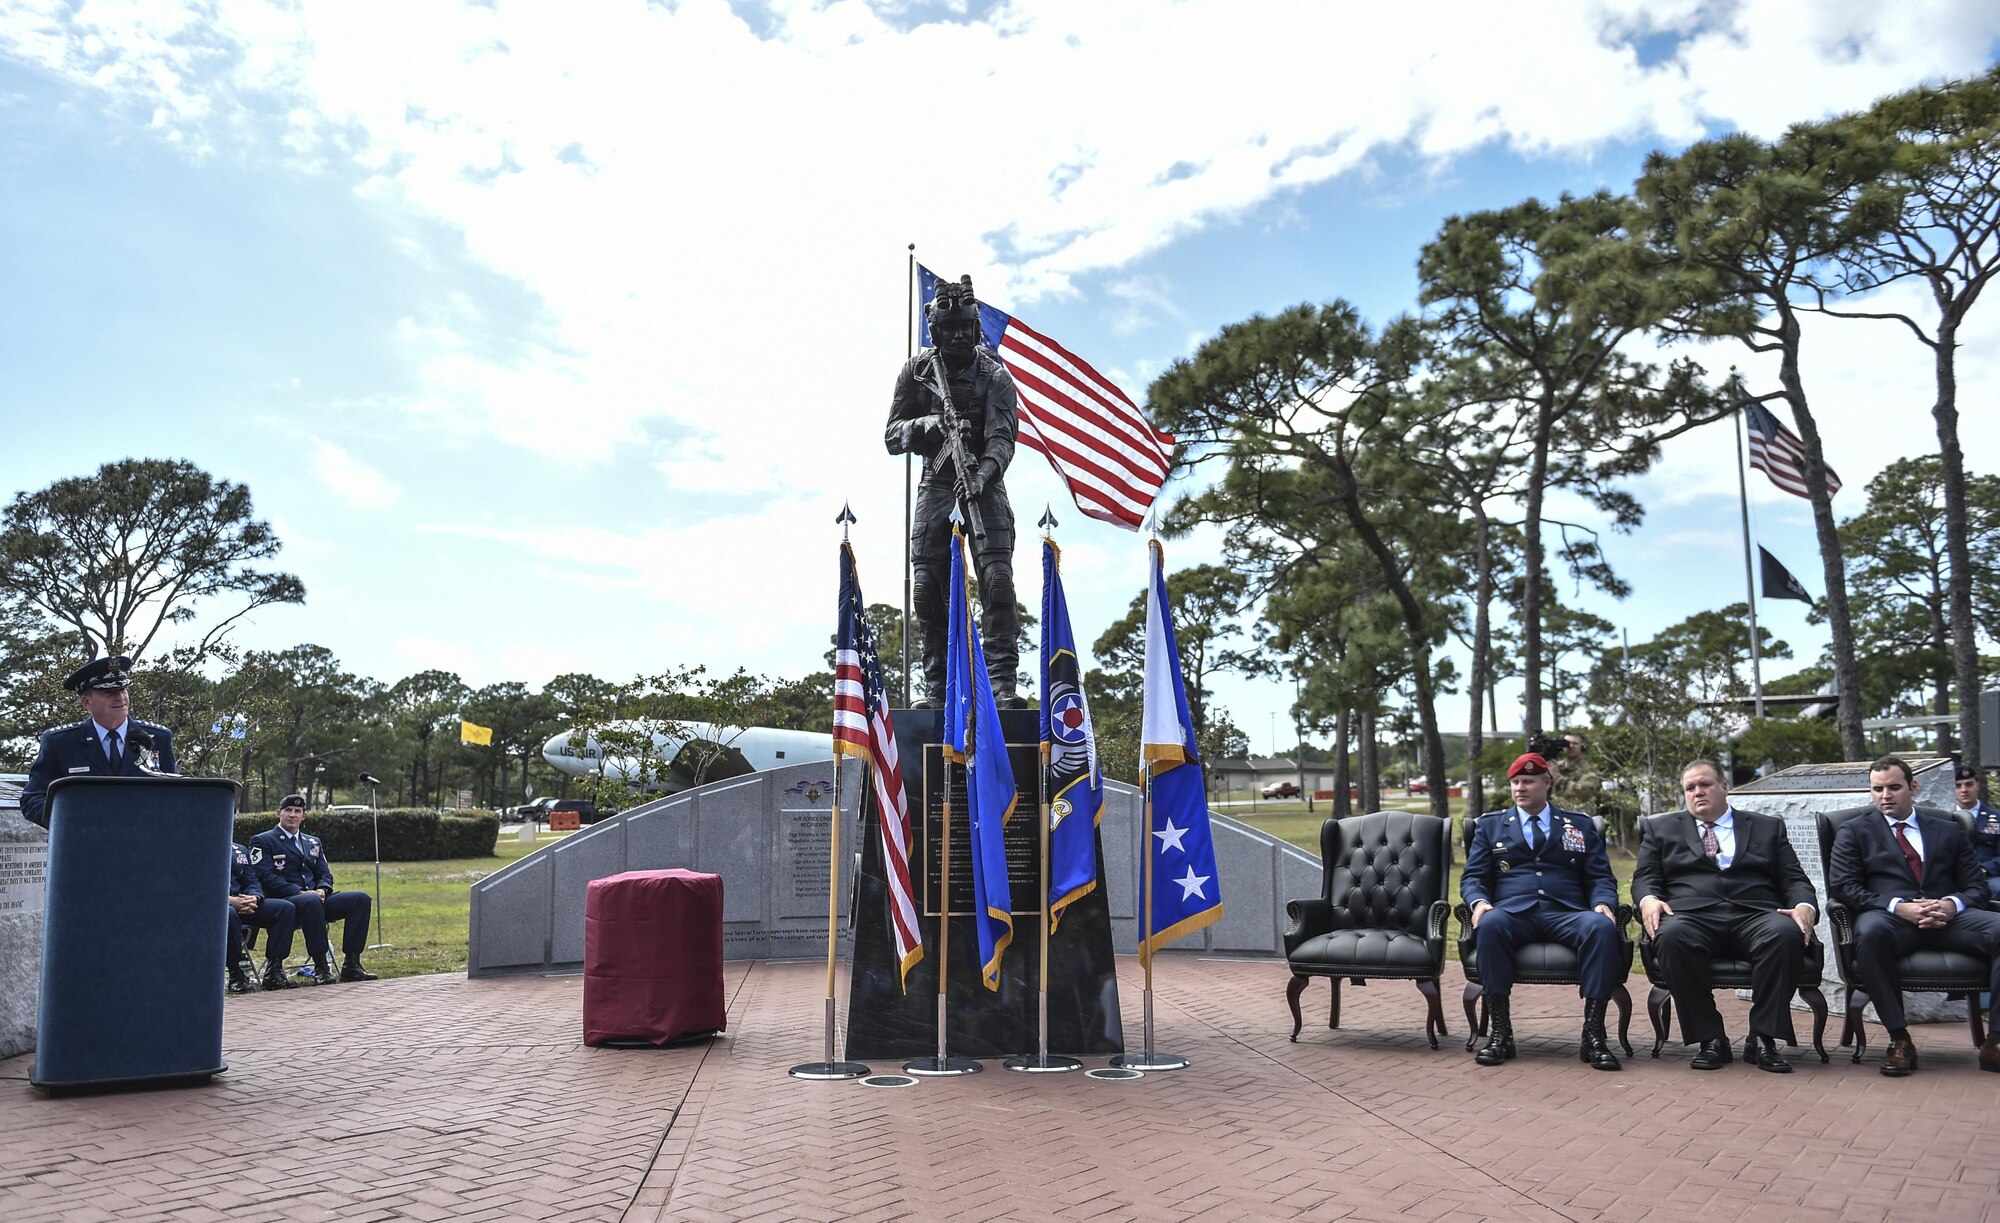 Chief of Staff of the Air Force Gen. David L. Goldfein, speaks during a dual Air Force Cross ceremony, April 20, 2017, at Hurlburt Field, Fla. Master Sgt. (Ret.) Keary Miller, a retired Special Tactics pararescueman from the Air National Guard’s 123rd Special Tactics Squadron, and Chris Baradat, a combat controller since separated, both received Air Force Crosses for their actions in combat, which were upgraded from Silver Star medals after a service-wide review. (U.S. Air Force photo by Senior Airman Ryan Conroy) 